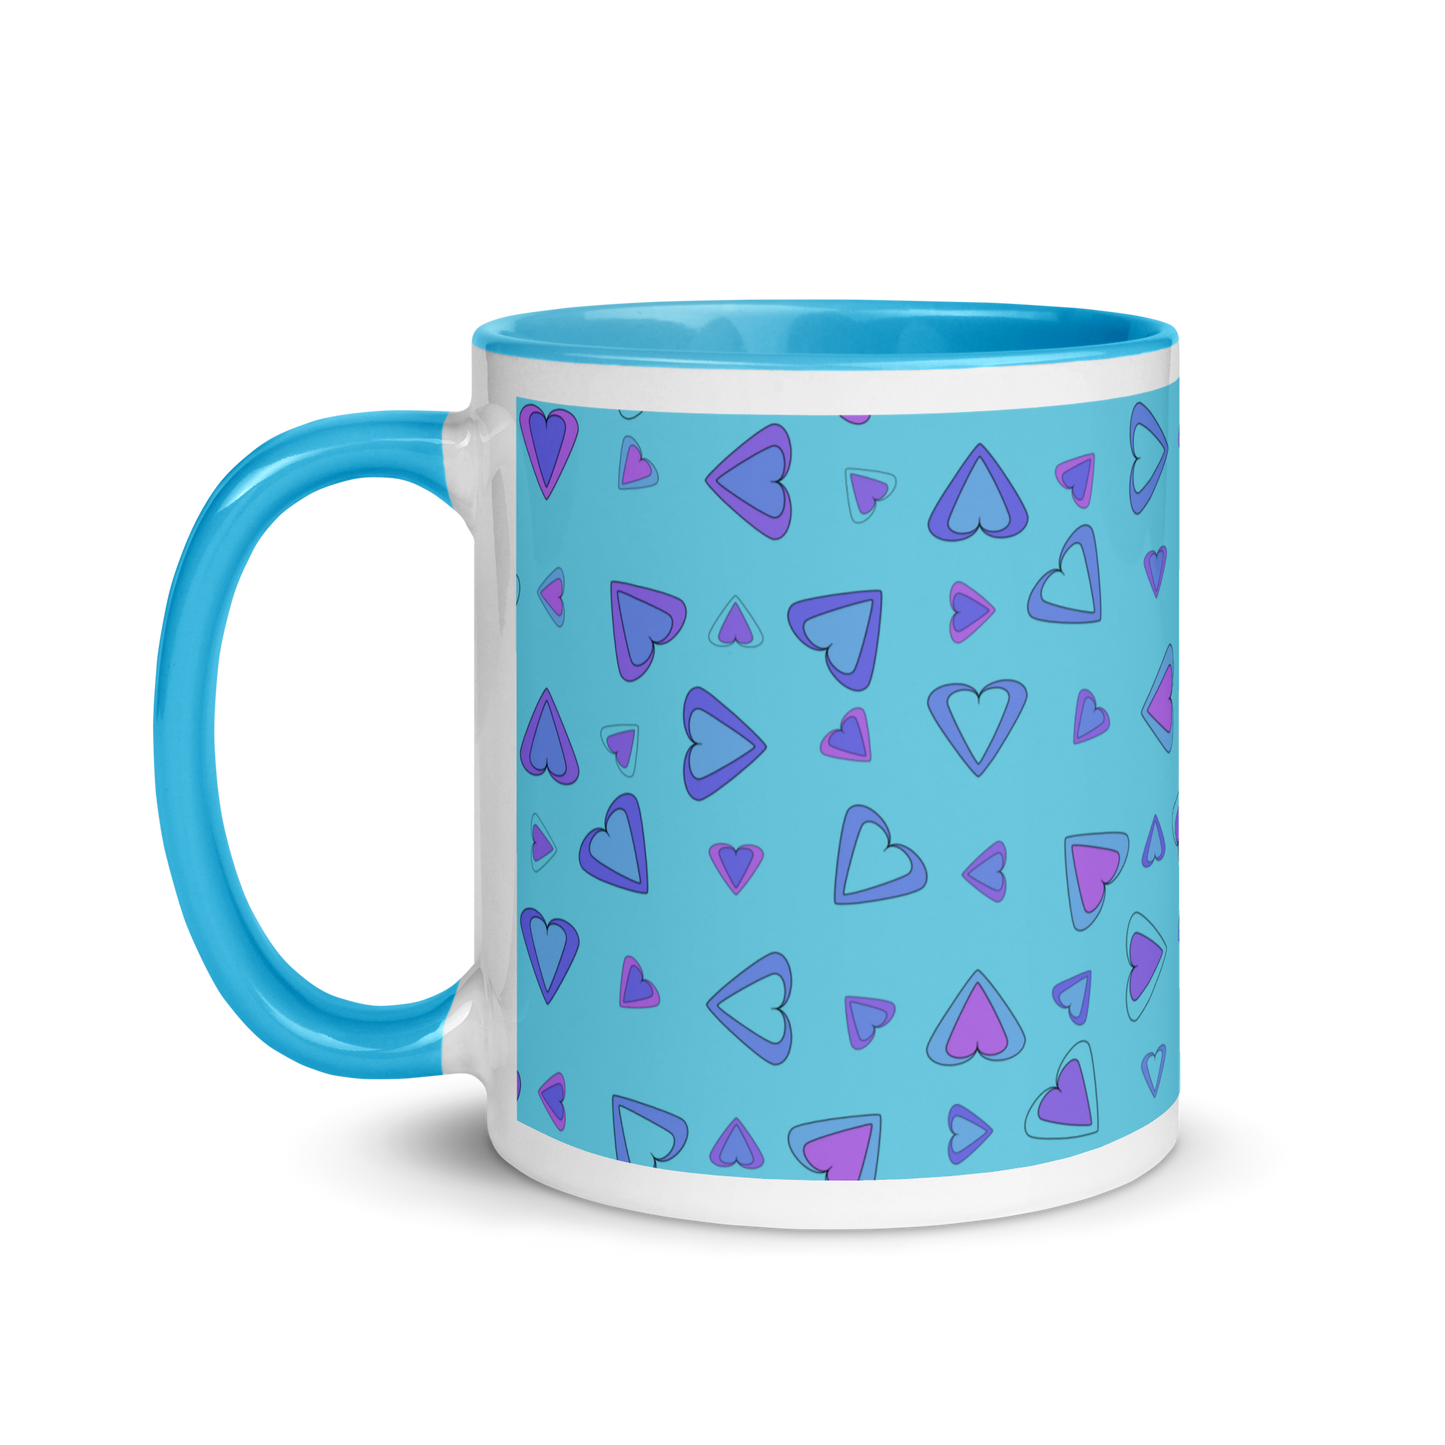 Rainbow Of Hearts | Batch 01 | Seamless Patterns | White Ceramic Mug with Color Inside - #9